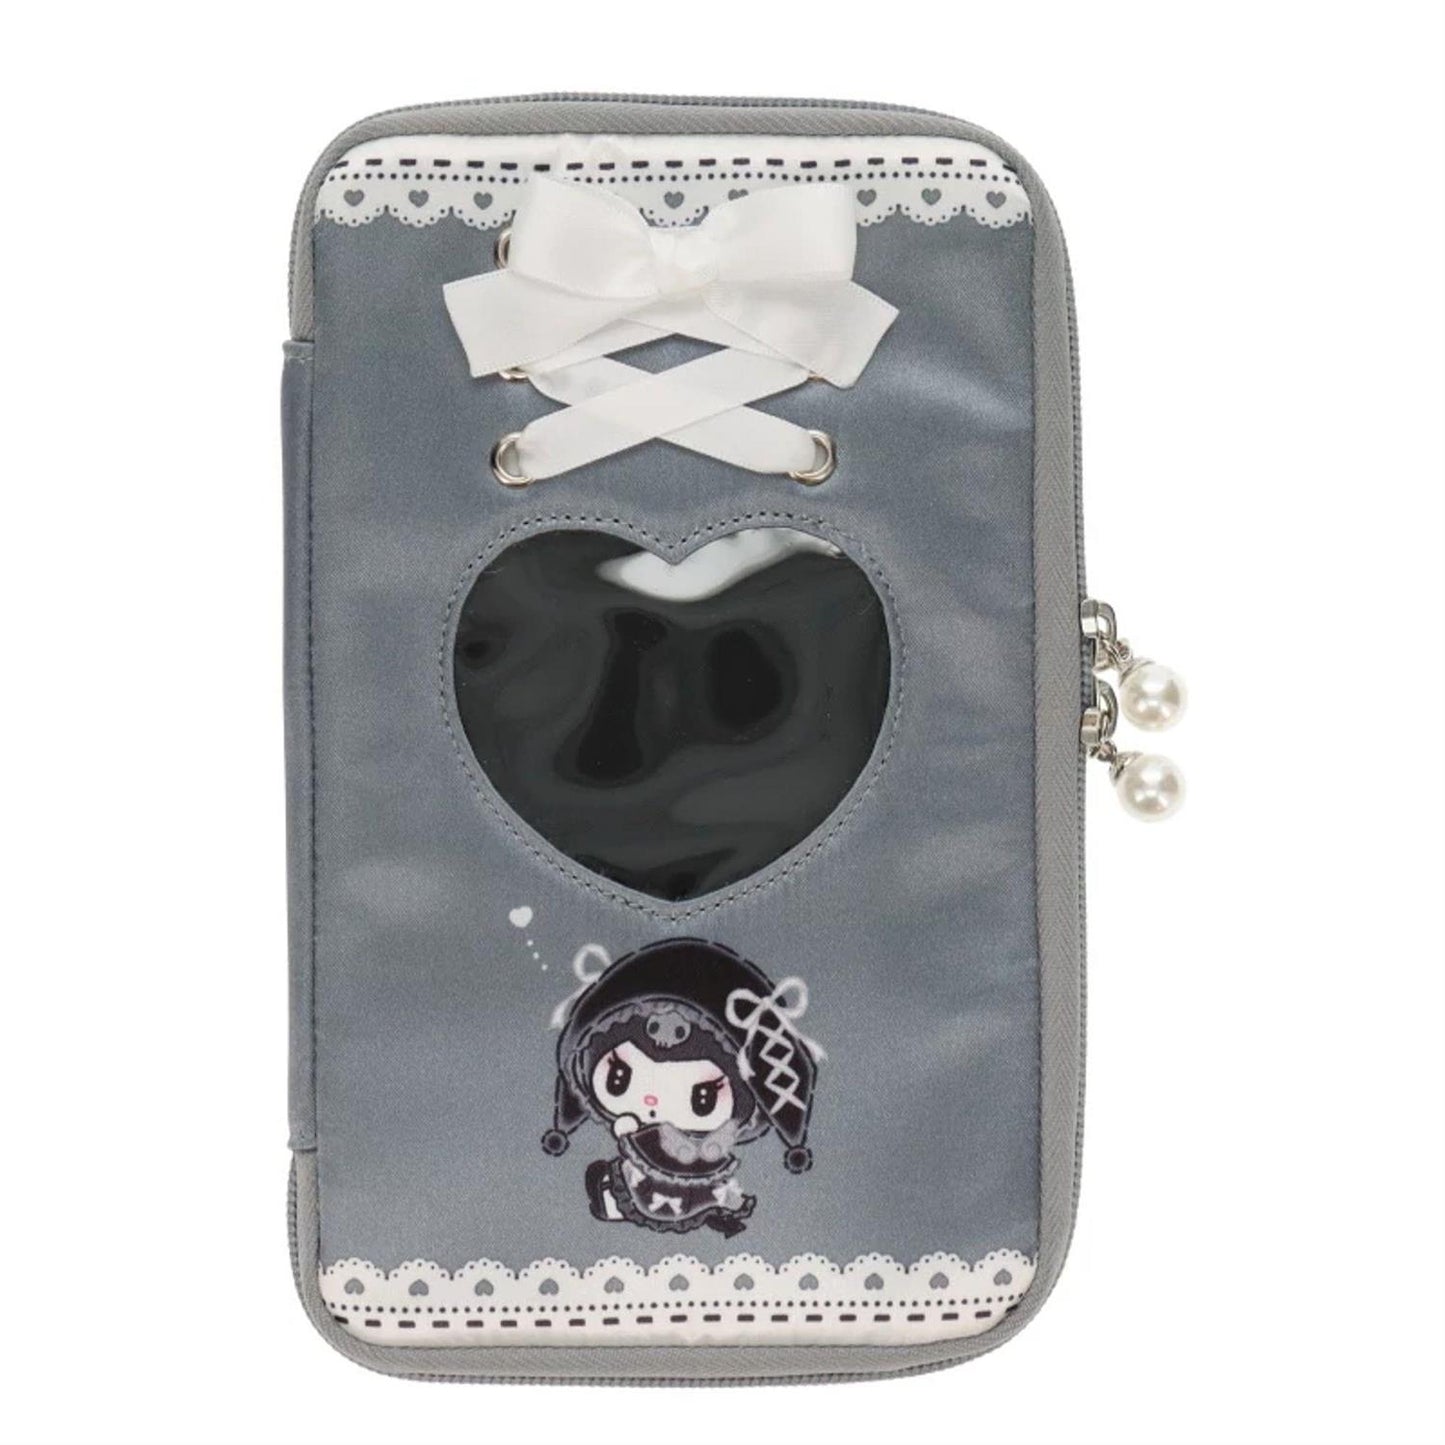 Sanrio MLKR3 Carry Pouch